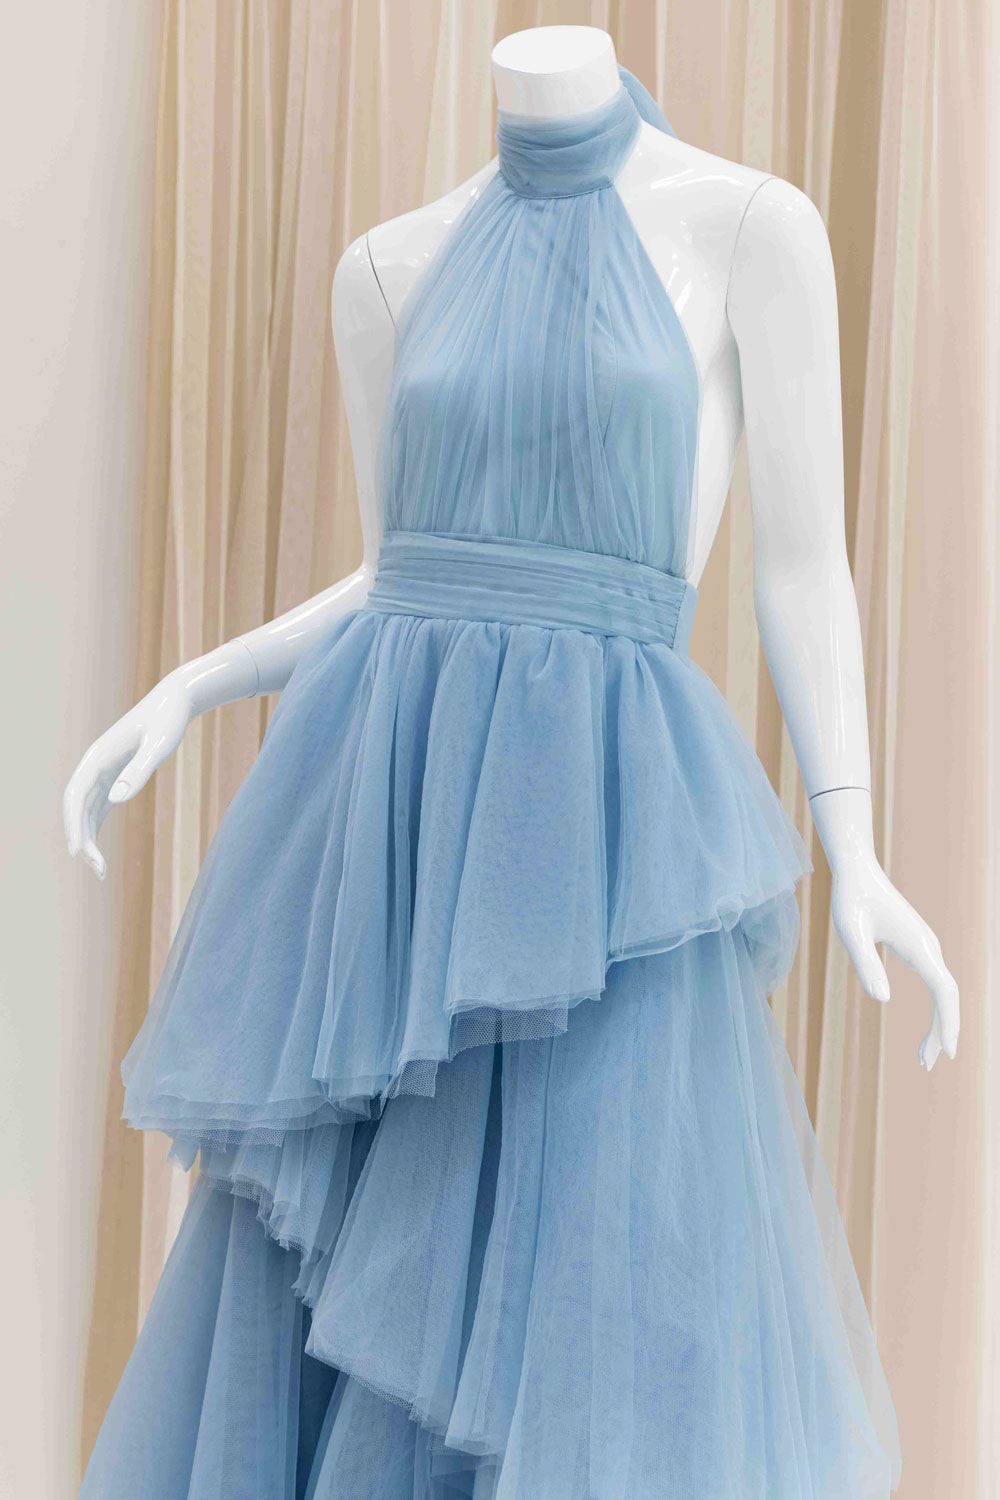 Layered Mesh Skirt Halter Top Open Back Ball Gown in Baby Blue